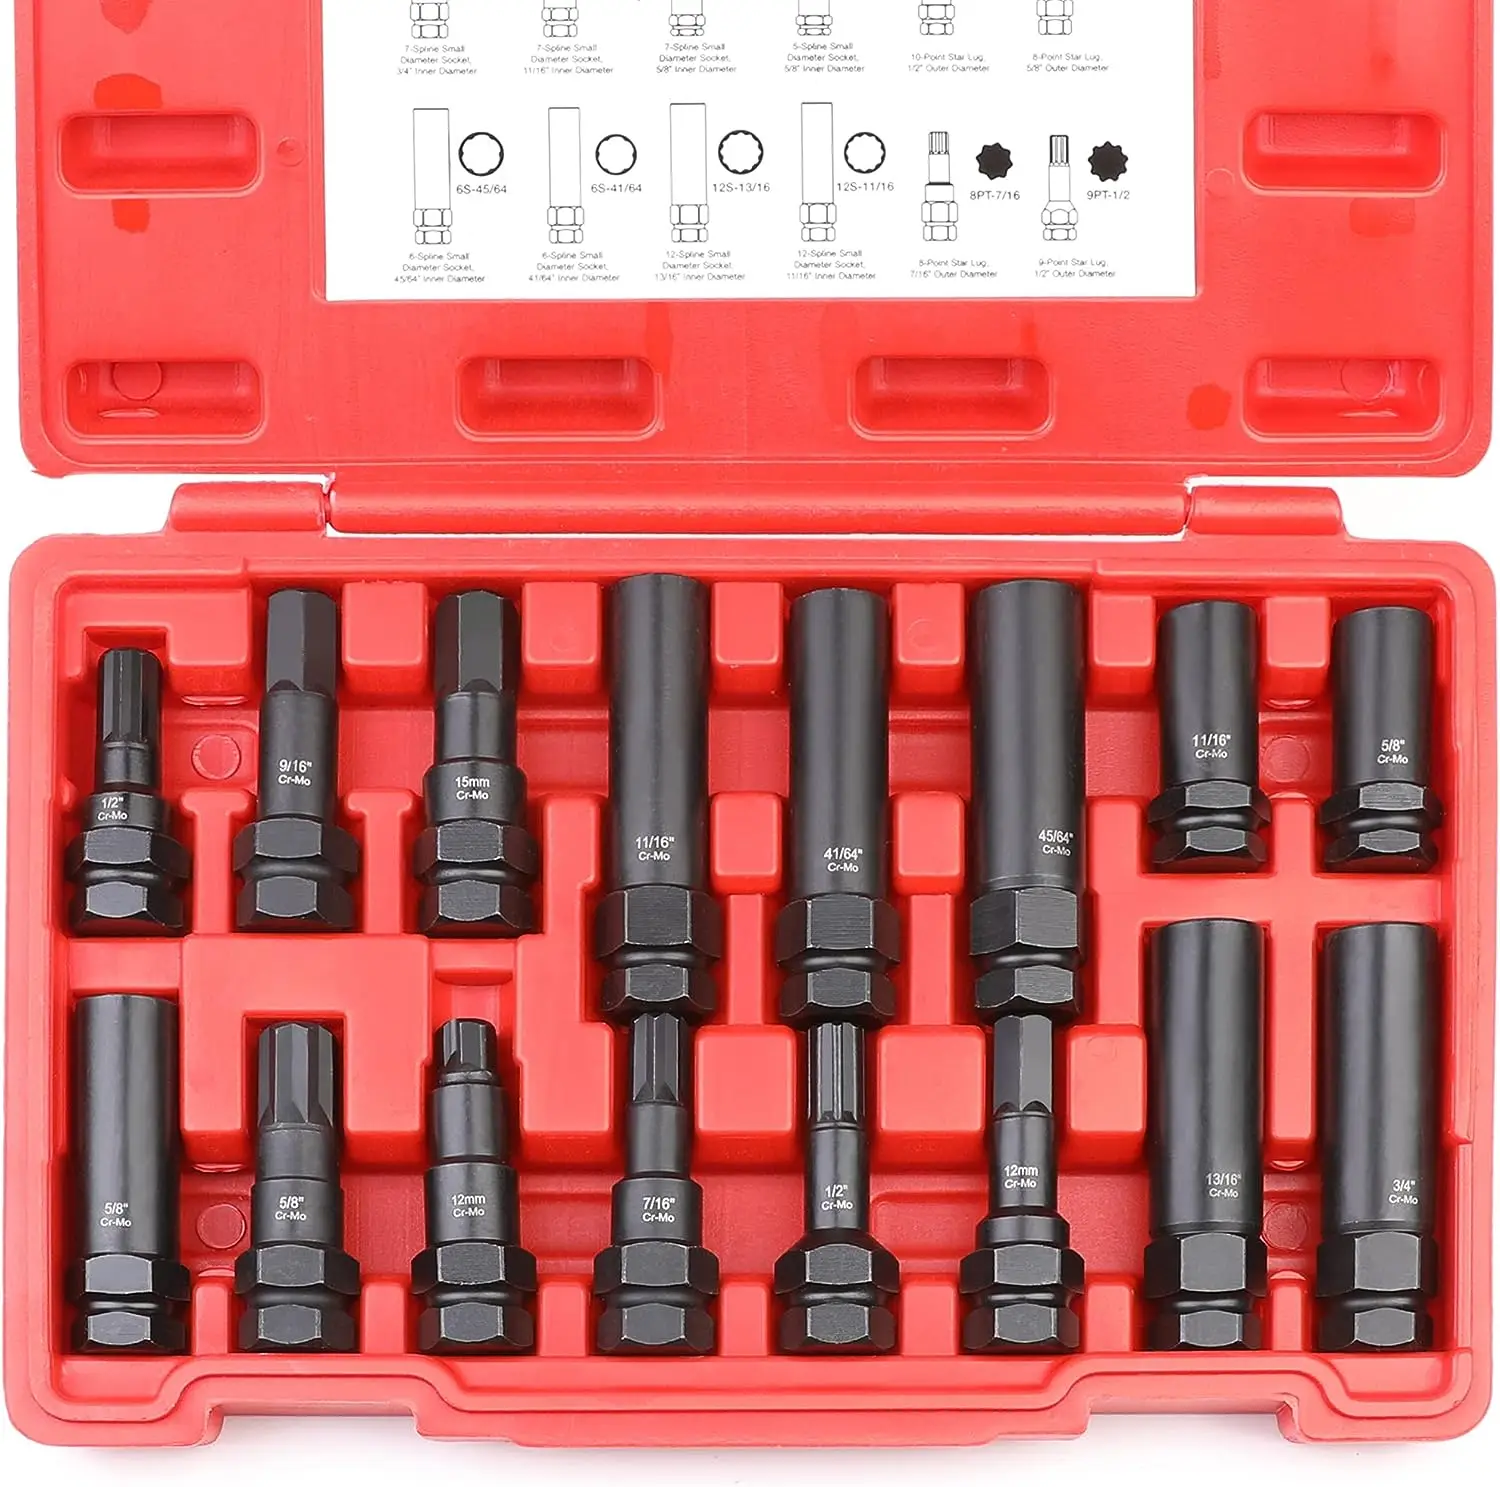 

Lug Nut Key Set, 16 Piece Set for Removing Locking Nuts on Aftermarket Wheels, Standard SAE and Metric Pieces, Used on Spline,